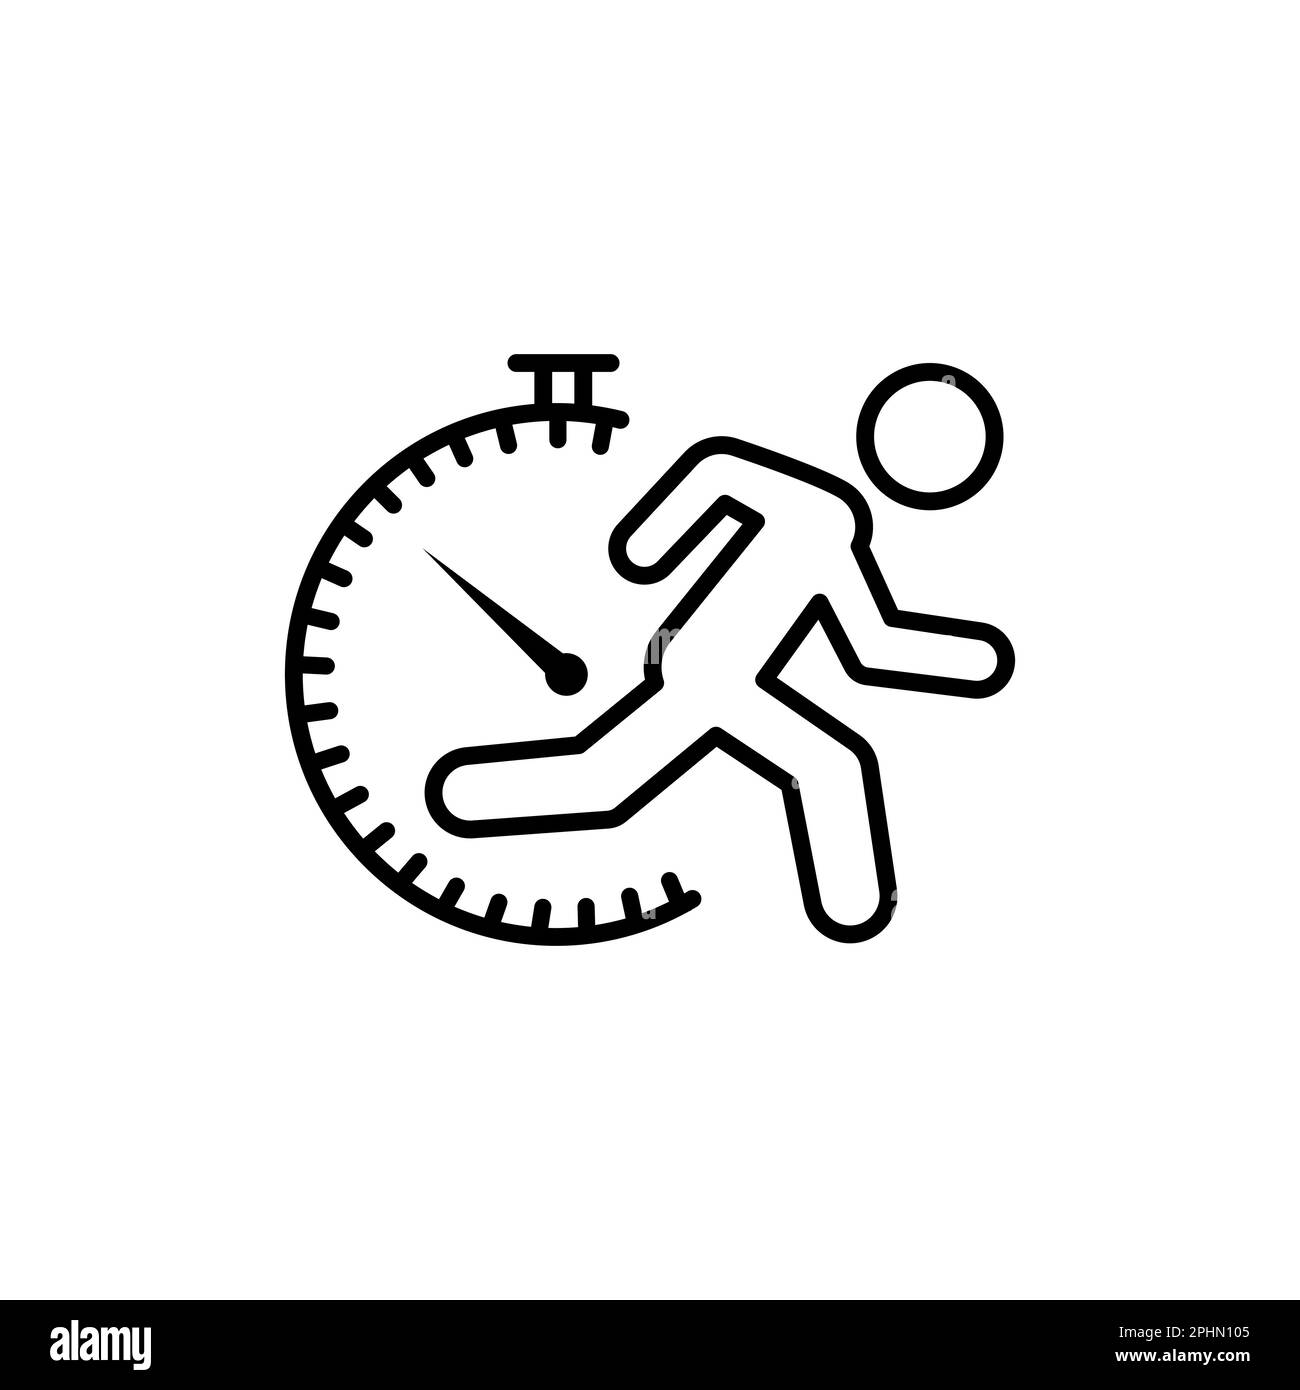 Fast pace runner icon, man quick accelerate, run on time, worker late on job, thin line web symbol on white background - editable stroke vector illust Stock Vector